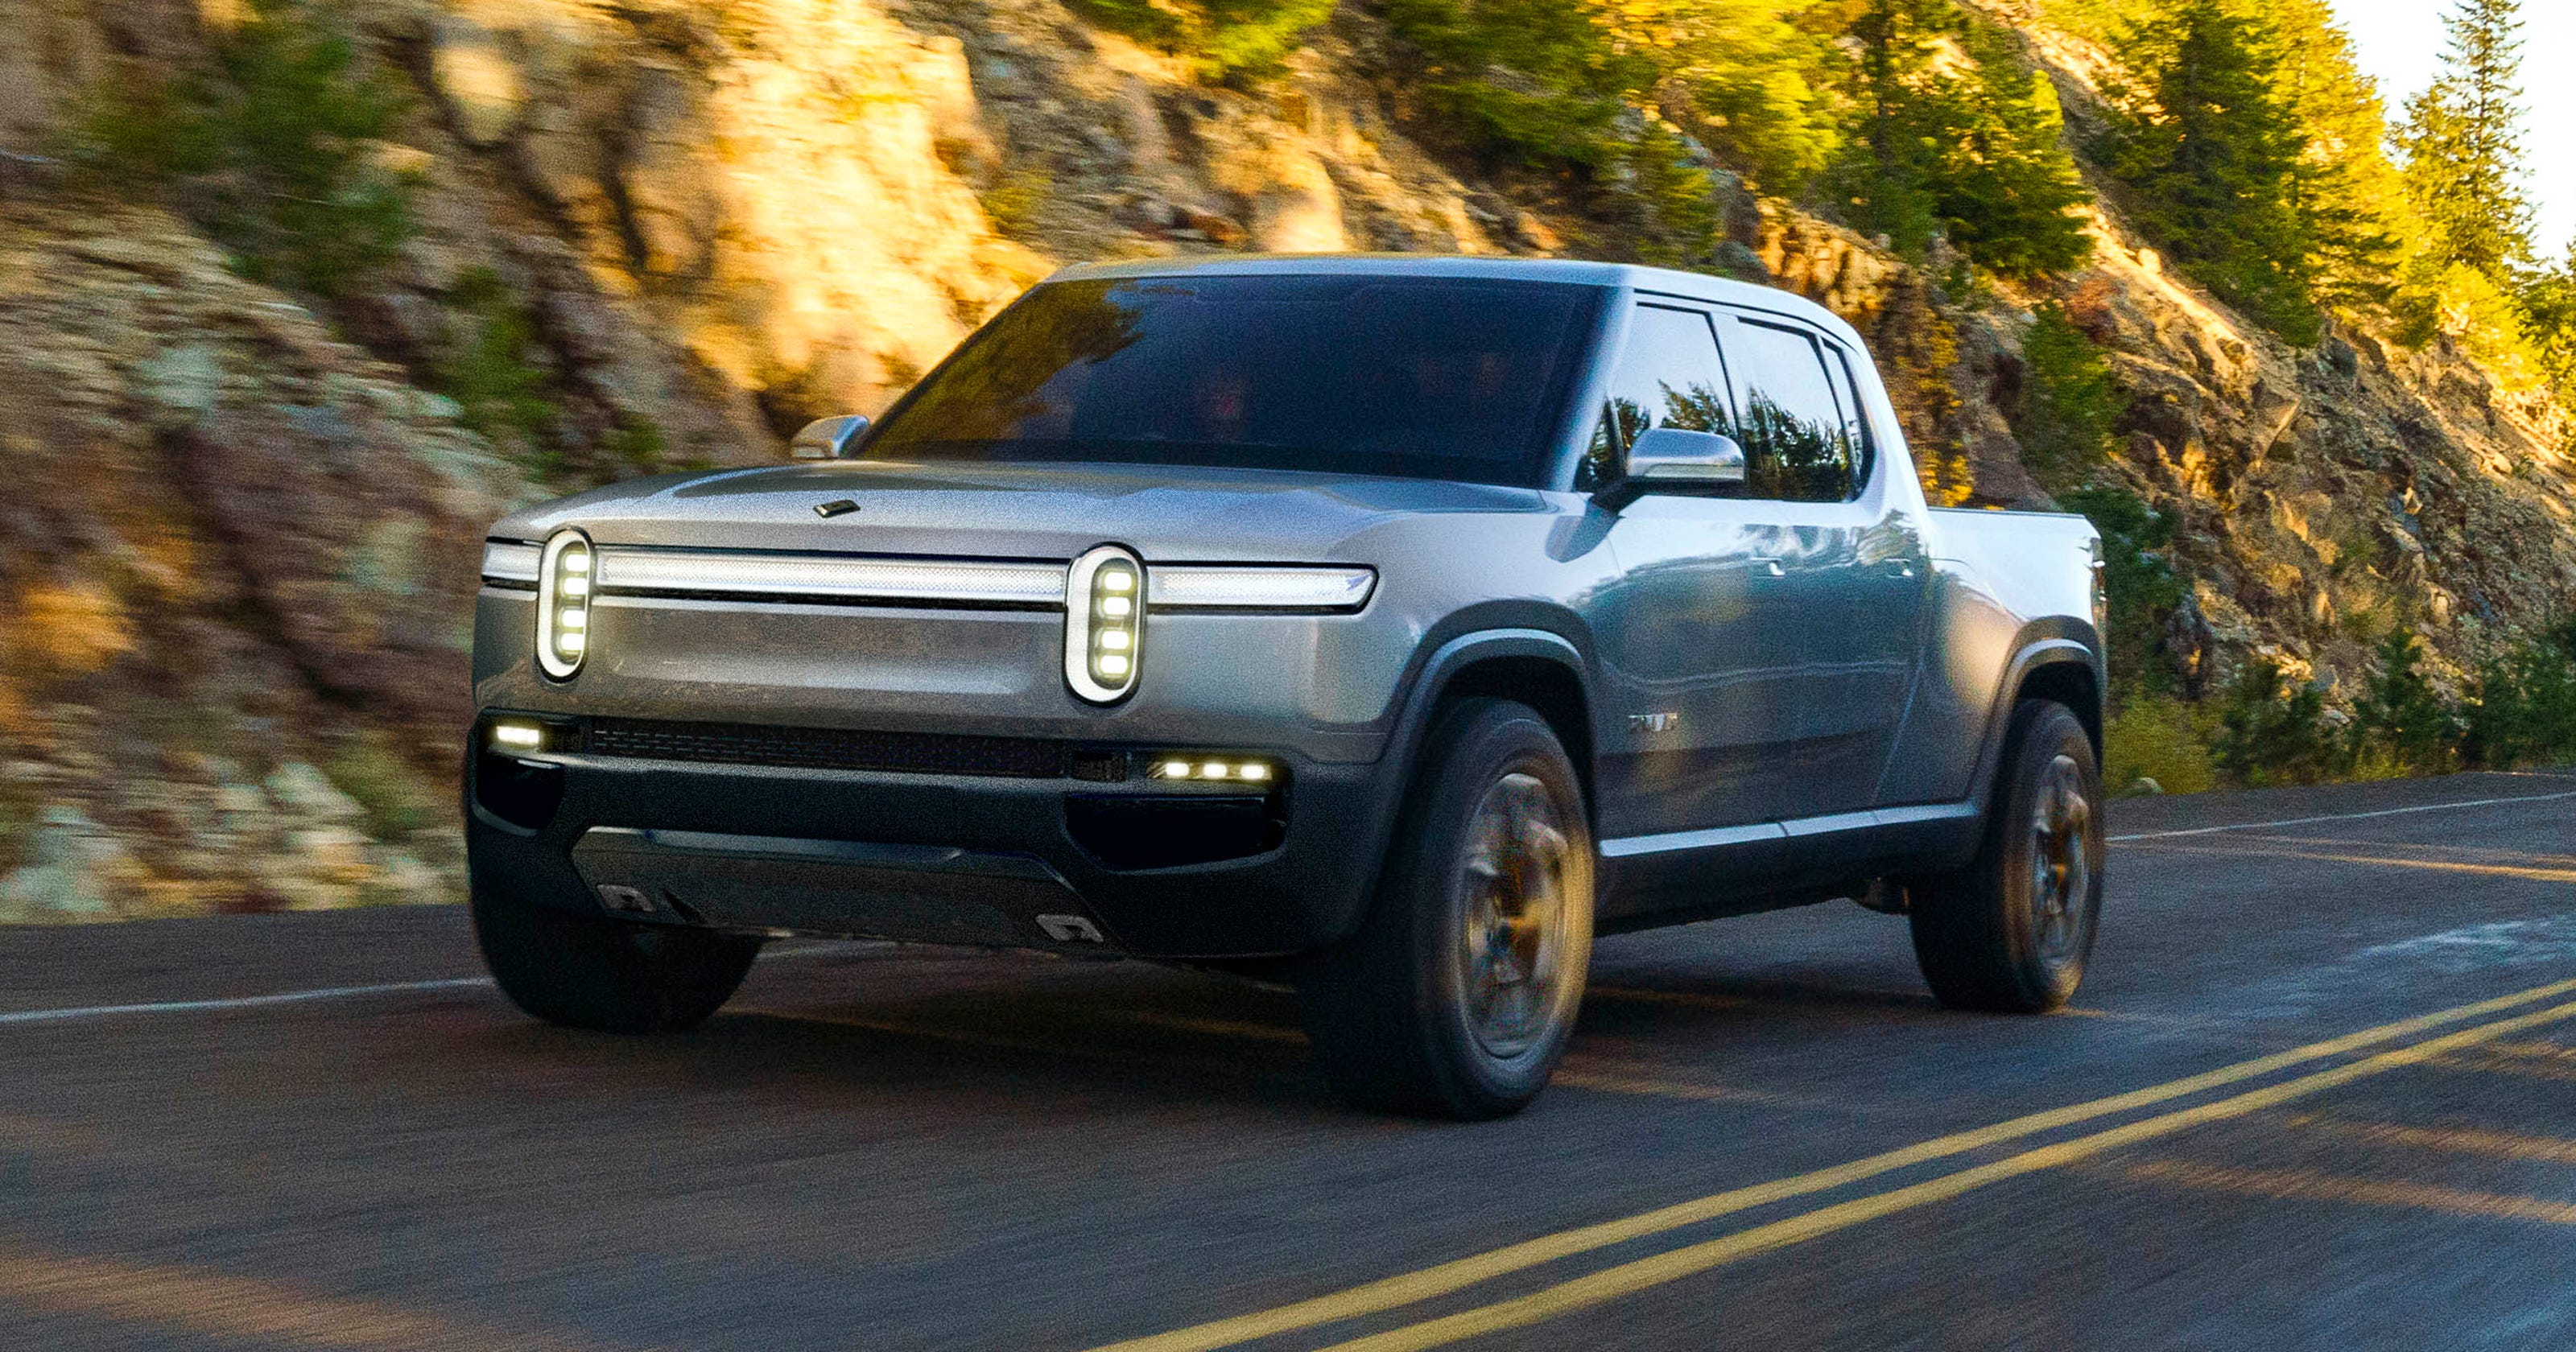 Amazon to lead 700M investment in electric vehicle startup Rivian